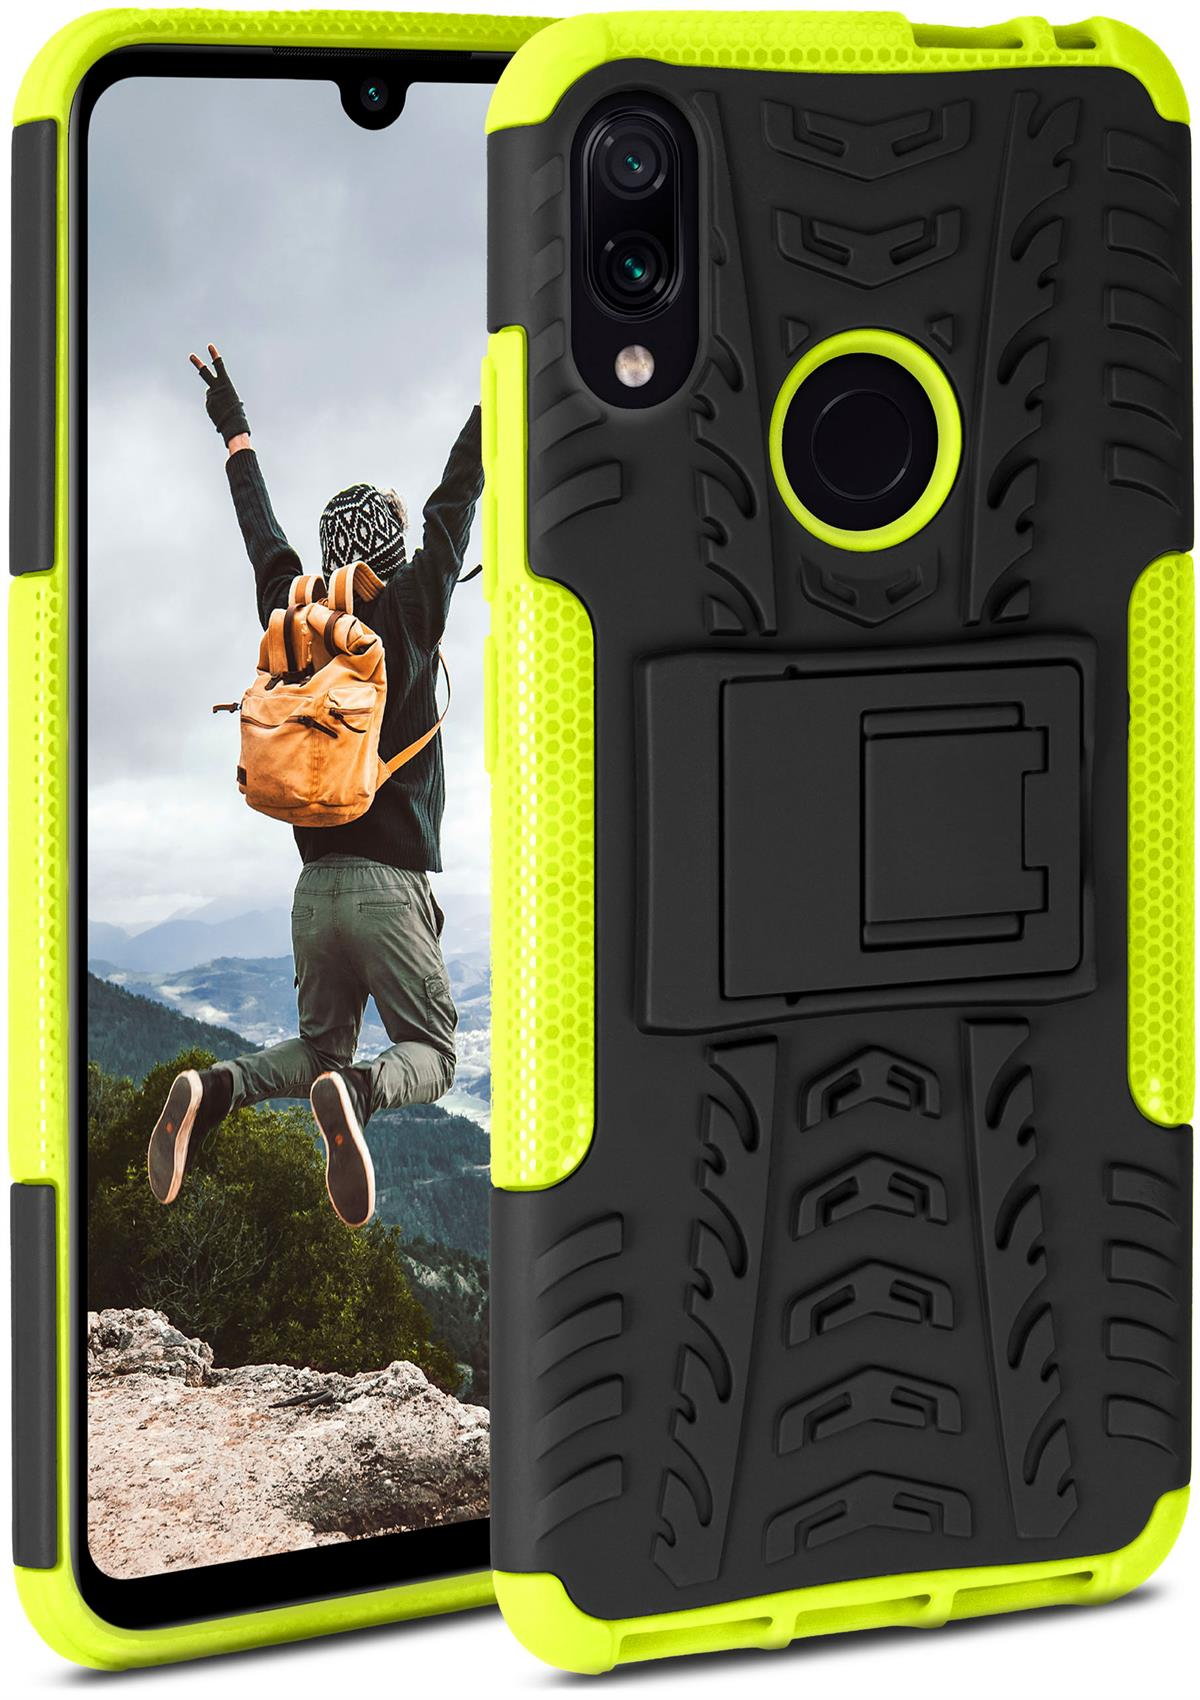 Redmi Note Backcover, Tank 7S, Xiaomi, ONEFLOW Case, Lime